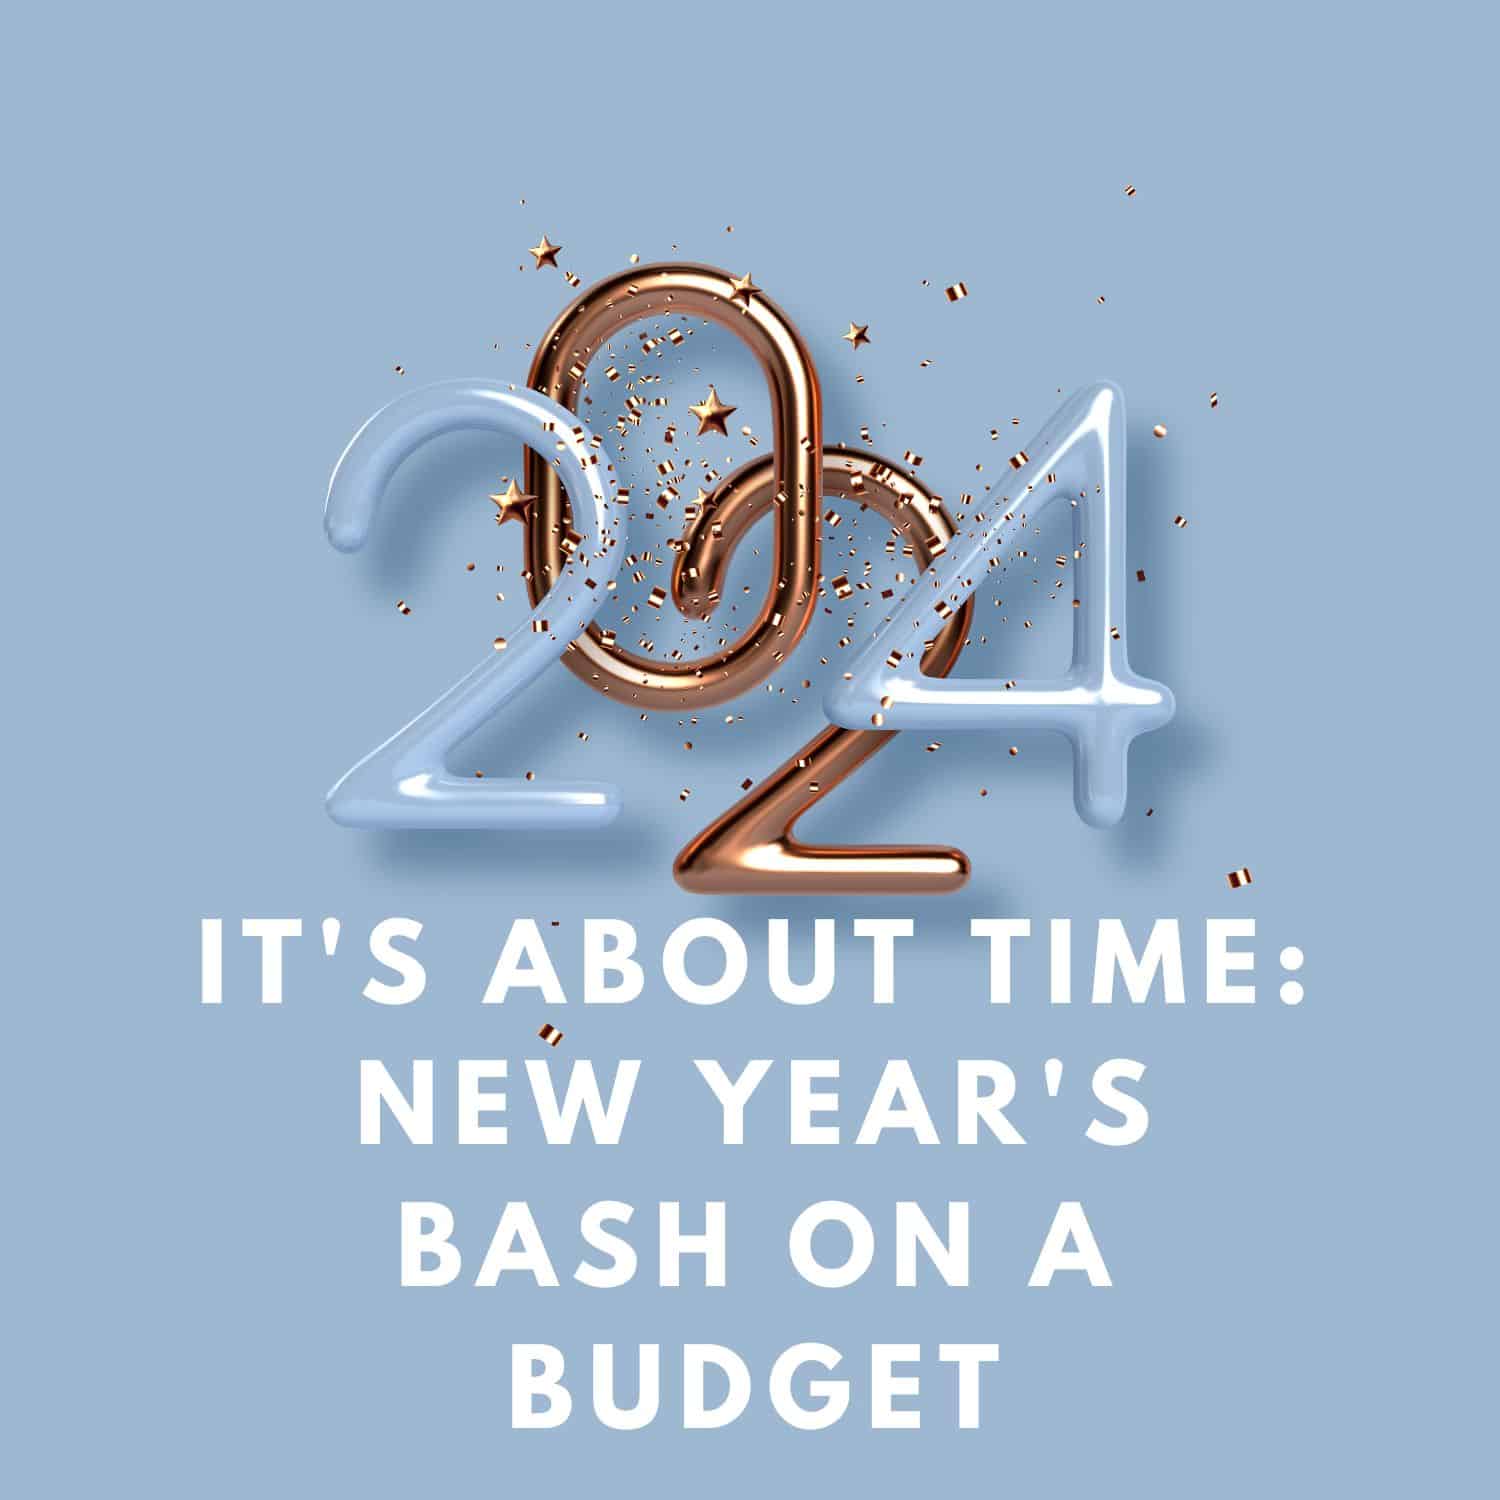 It's About Time New Year's Bash on a Budget